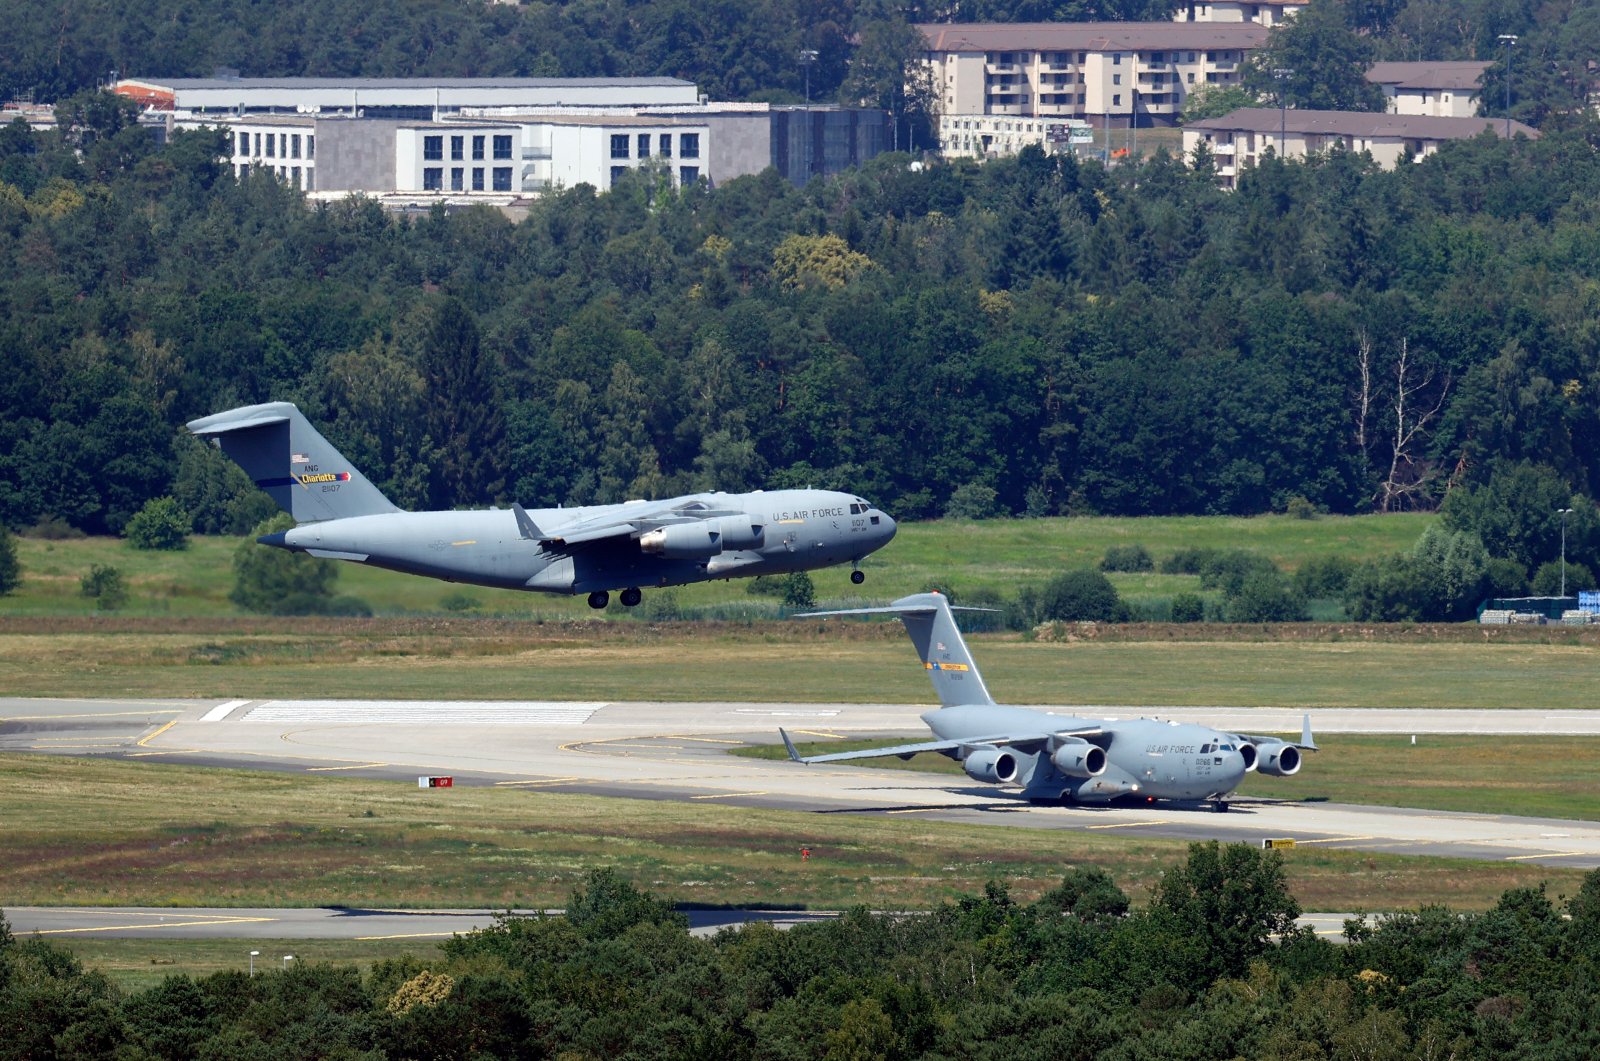 A U.S. military aircraft lands at the U.S. air base in Ramstein, Germany, June 25, 2020. (EPA Photo)